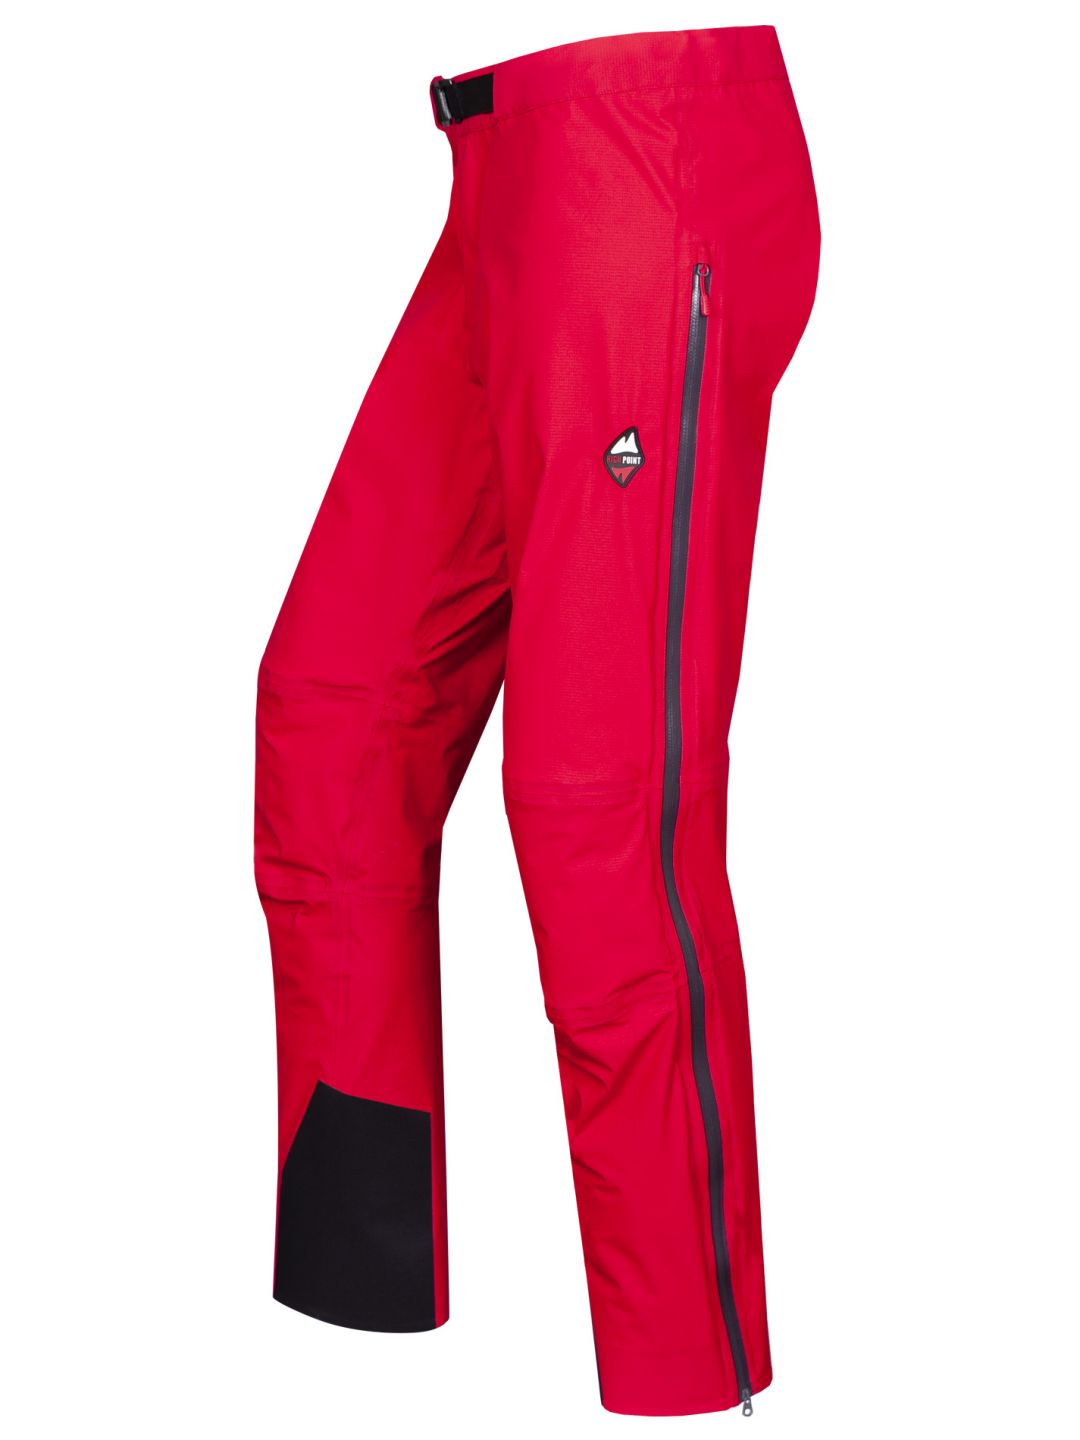 HIGH POINT CLIFF pants red varianta: XXL